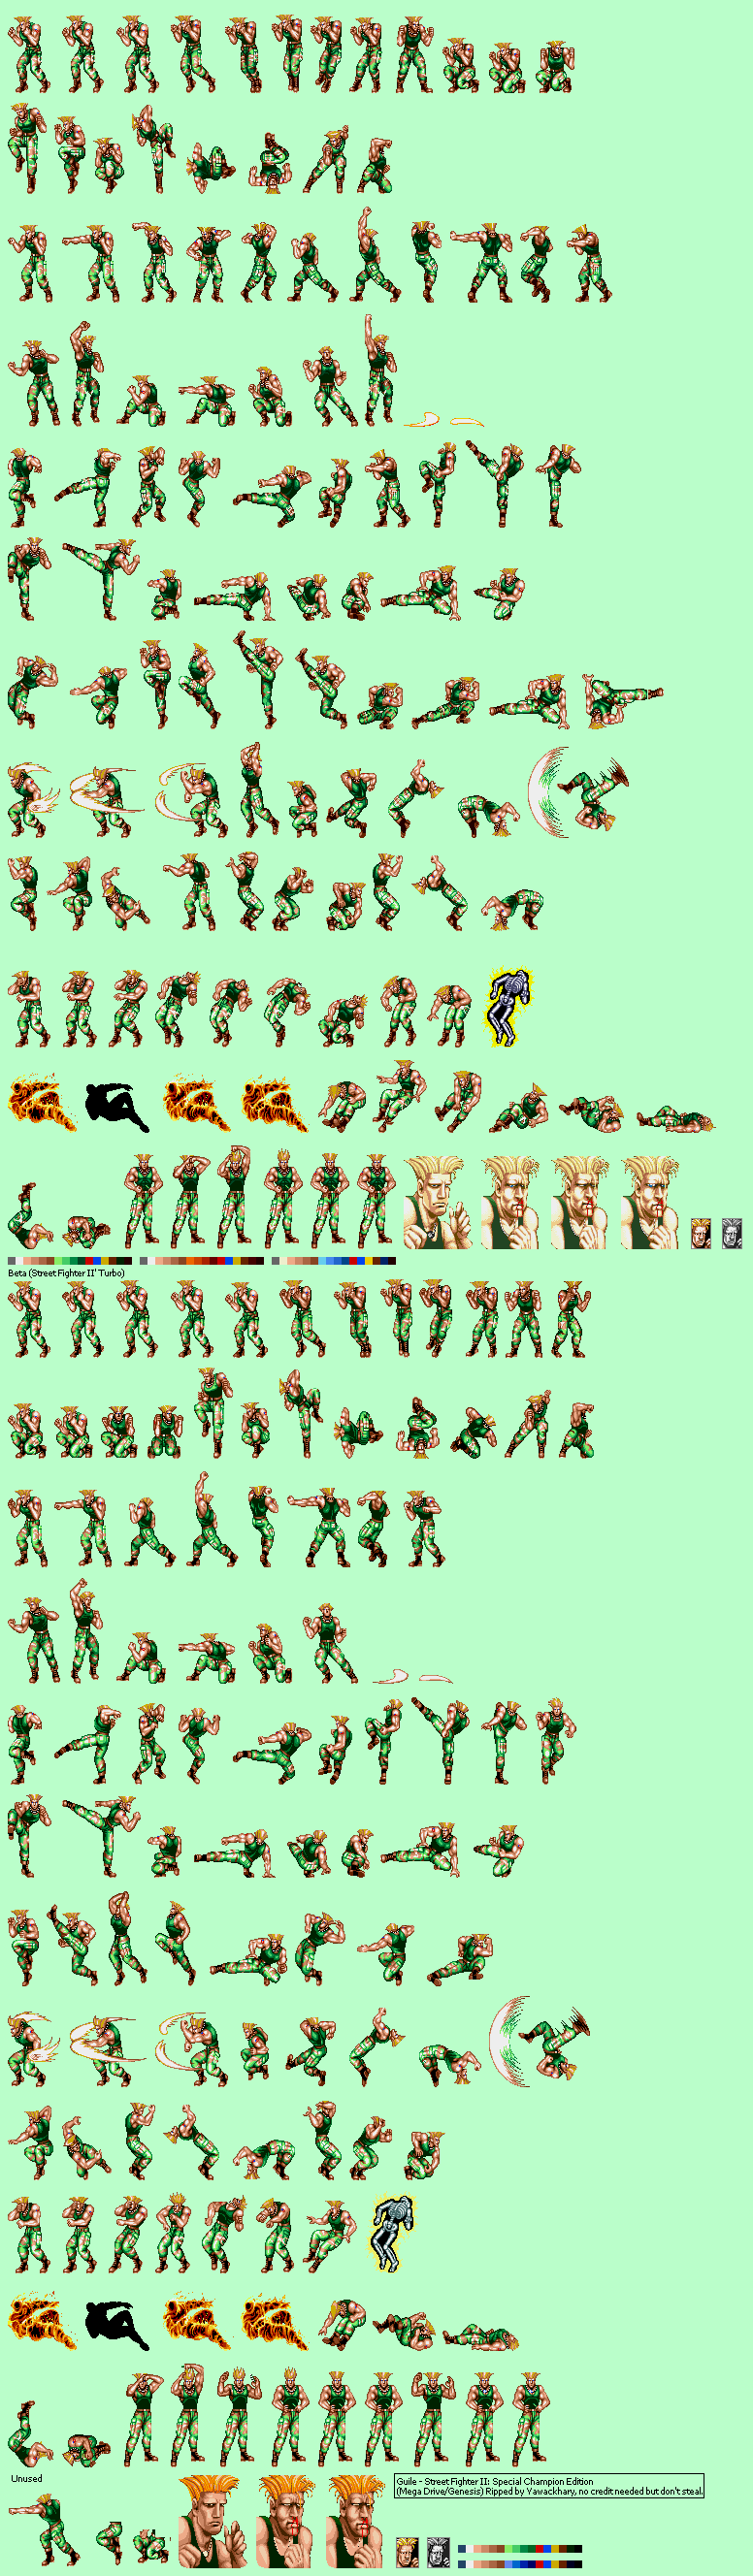 PC / Computer - Street Fighter V - Cammy (1) - The Models Resource